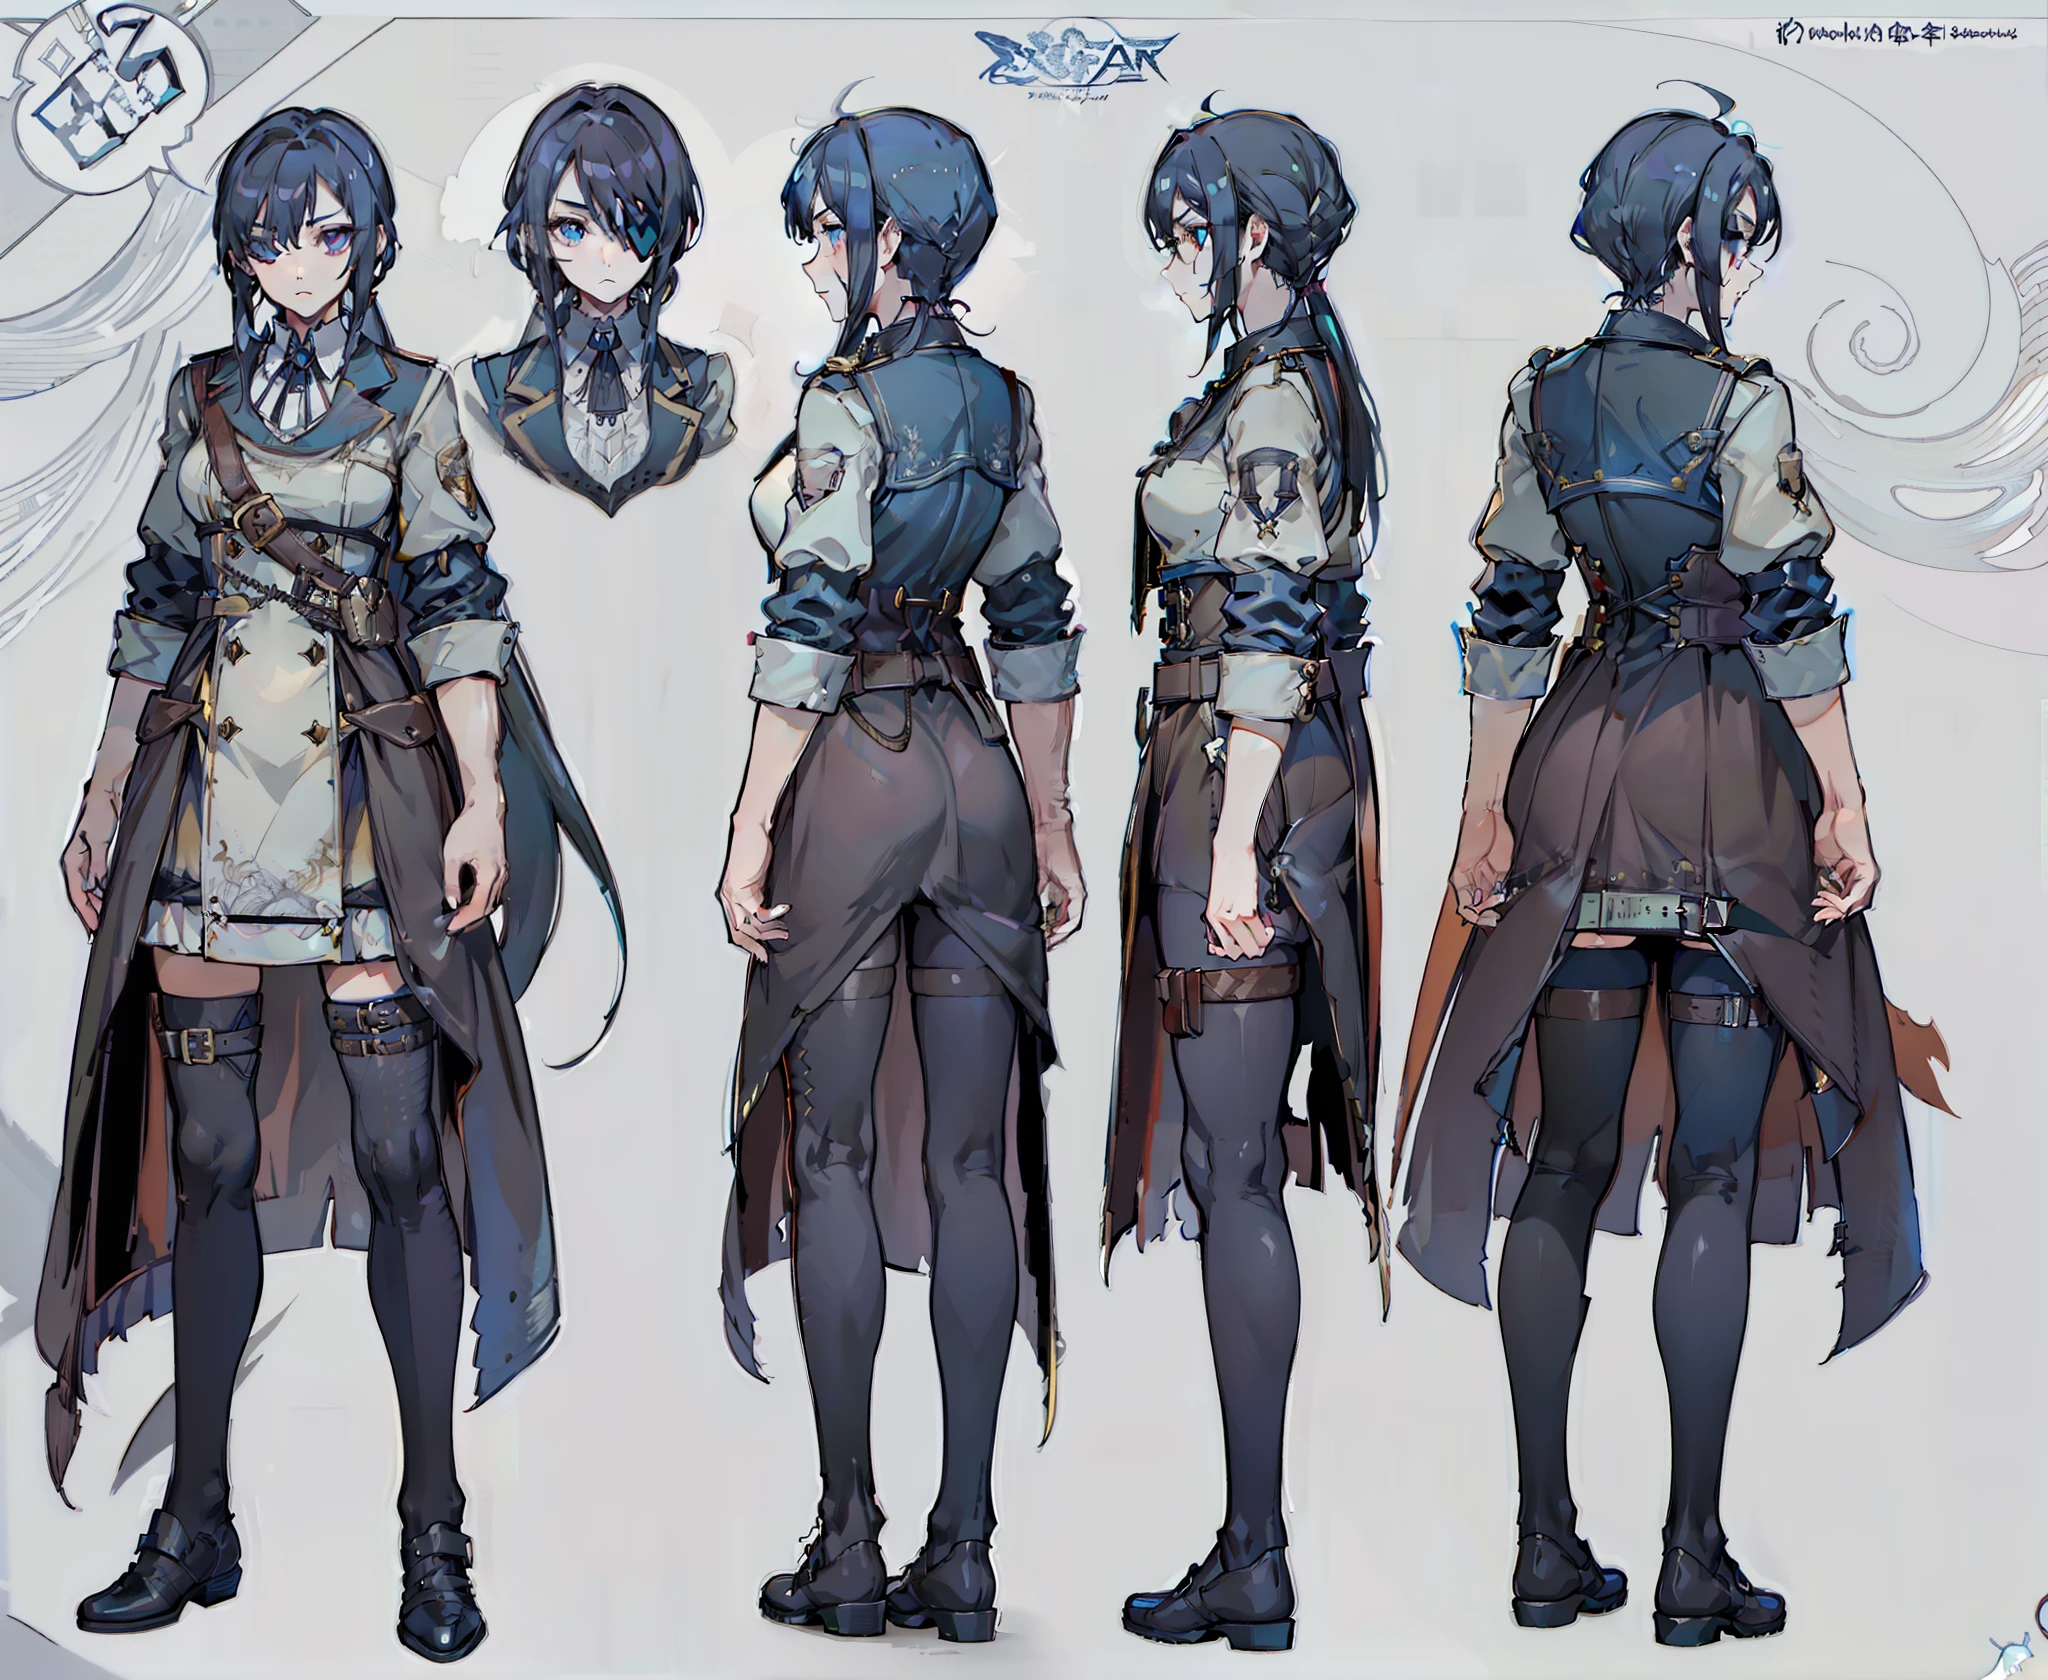 1woman, reference sheet, matching outfit, (fantasy character design, front, back, sides, left, right, up, down) Rodericka. Tall and well-built stature with feminine grace. Piercing blue eye holding a hint of mystery, the other eye socket covered with an eyepatch, a reminder of her past encounters. Dark, slightly unkempt hair giving her a rugged and dashing appearance. Practical yet stylish attire designed for adventurous travels. Confident and seasoned, with calloused hands and scars as proof of her experiences. (masterpiece:1.2), (best quality:1.3).